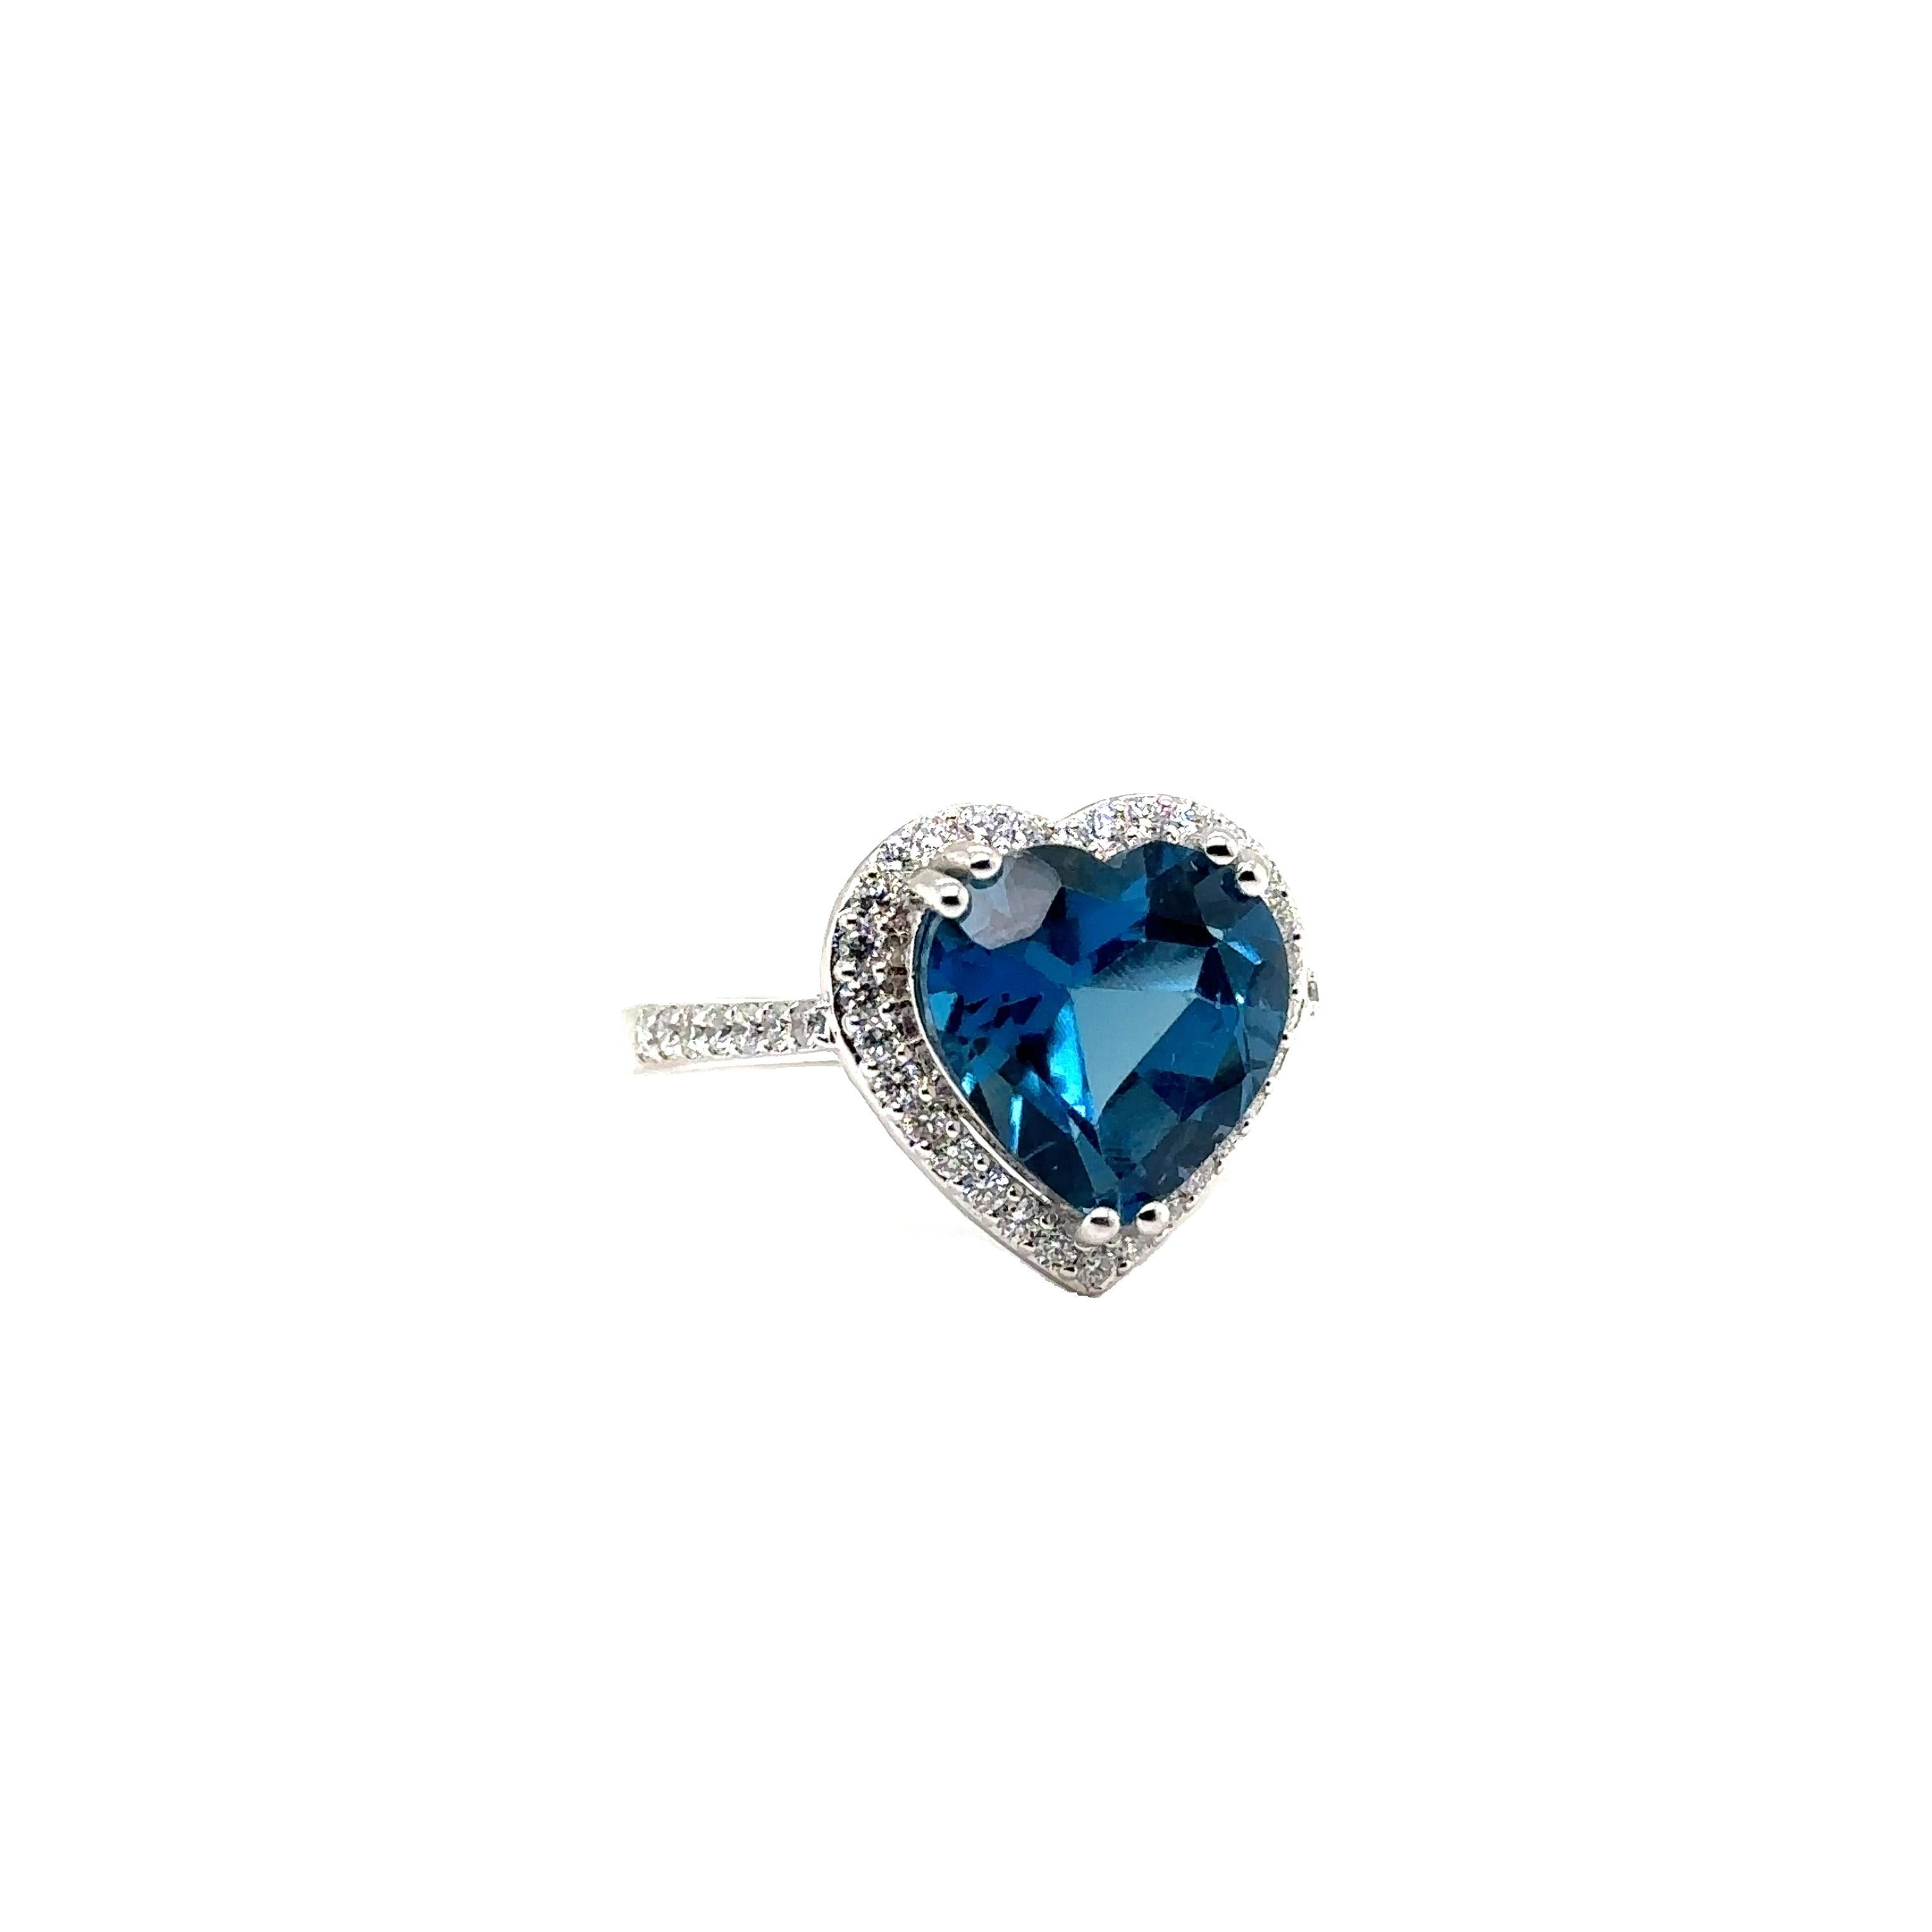 JAS-21-2259 - 14K WG 0.75Ct GH-SI1 DIAMONDS & 12MM HEART SHAPE LONDON BLUE TOPAZ In New Condition For Sale In New York, NY